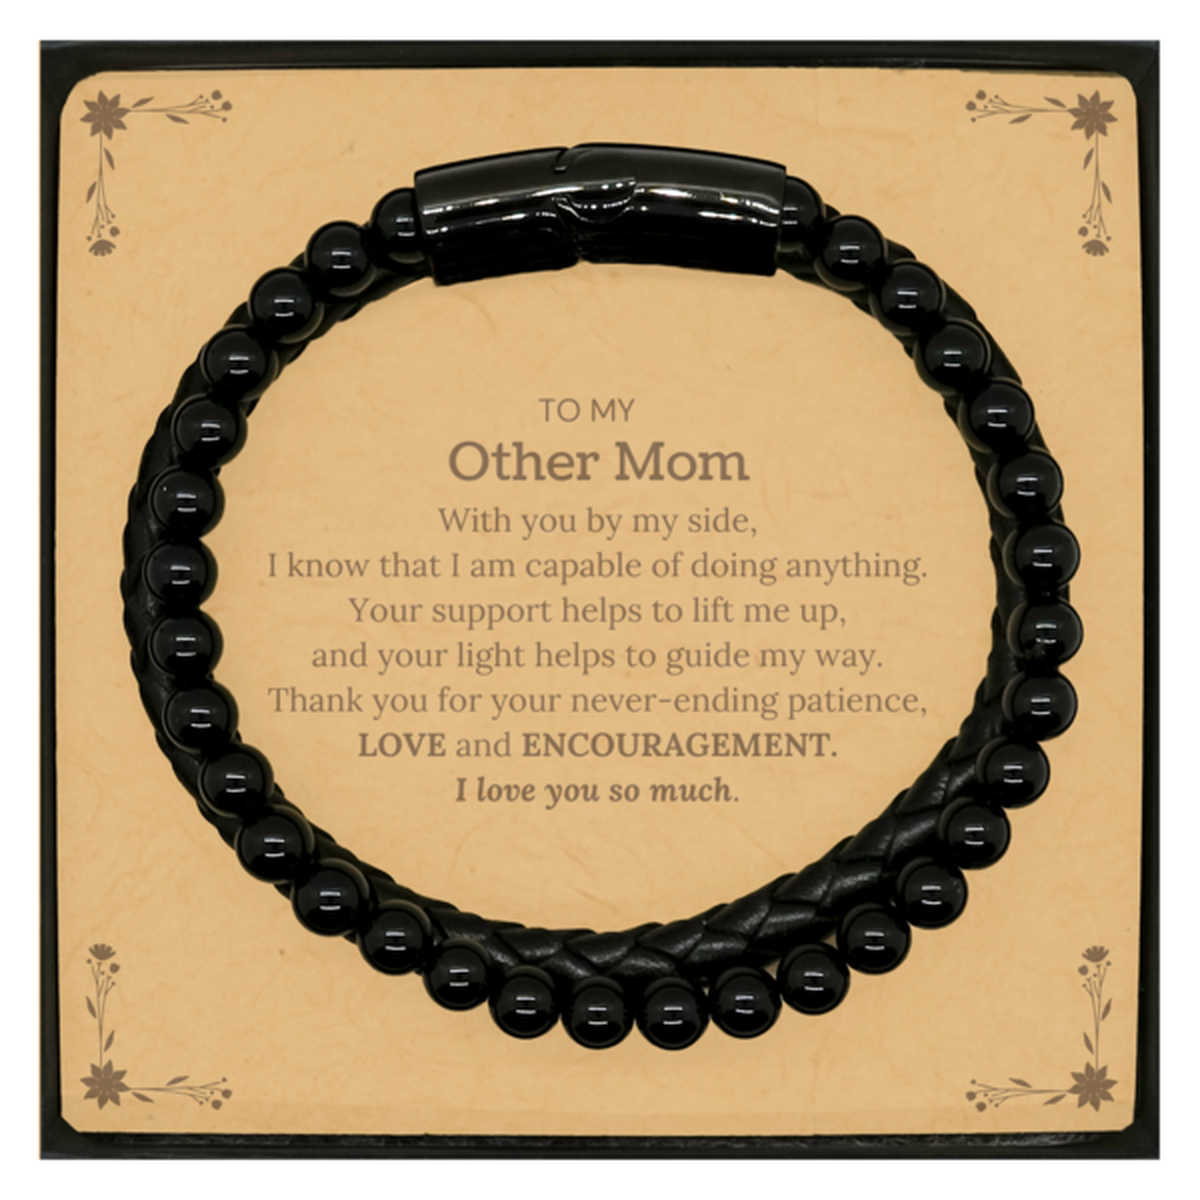 Appreciation Other Mom Stone Leather Bracelets Gifts, To My Other Mom Birthday Christmas Wedding Keepsake Gifts for Other Mom With you by my side, I know that I am capable of doing anything. I love you so much